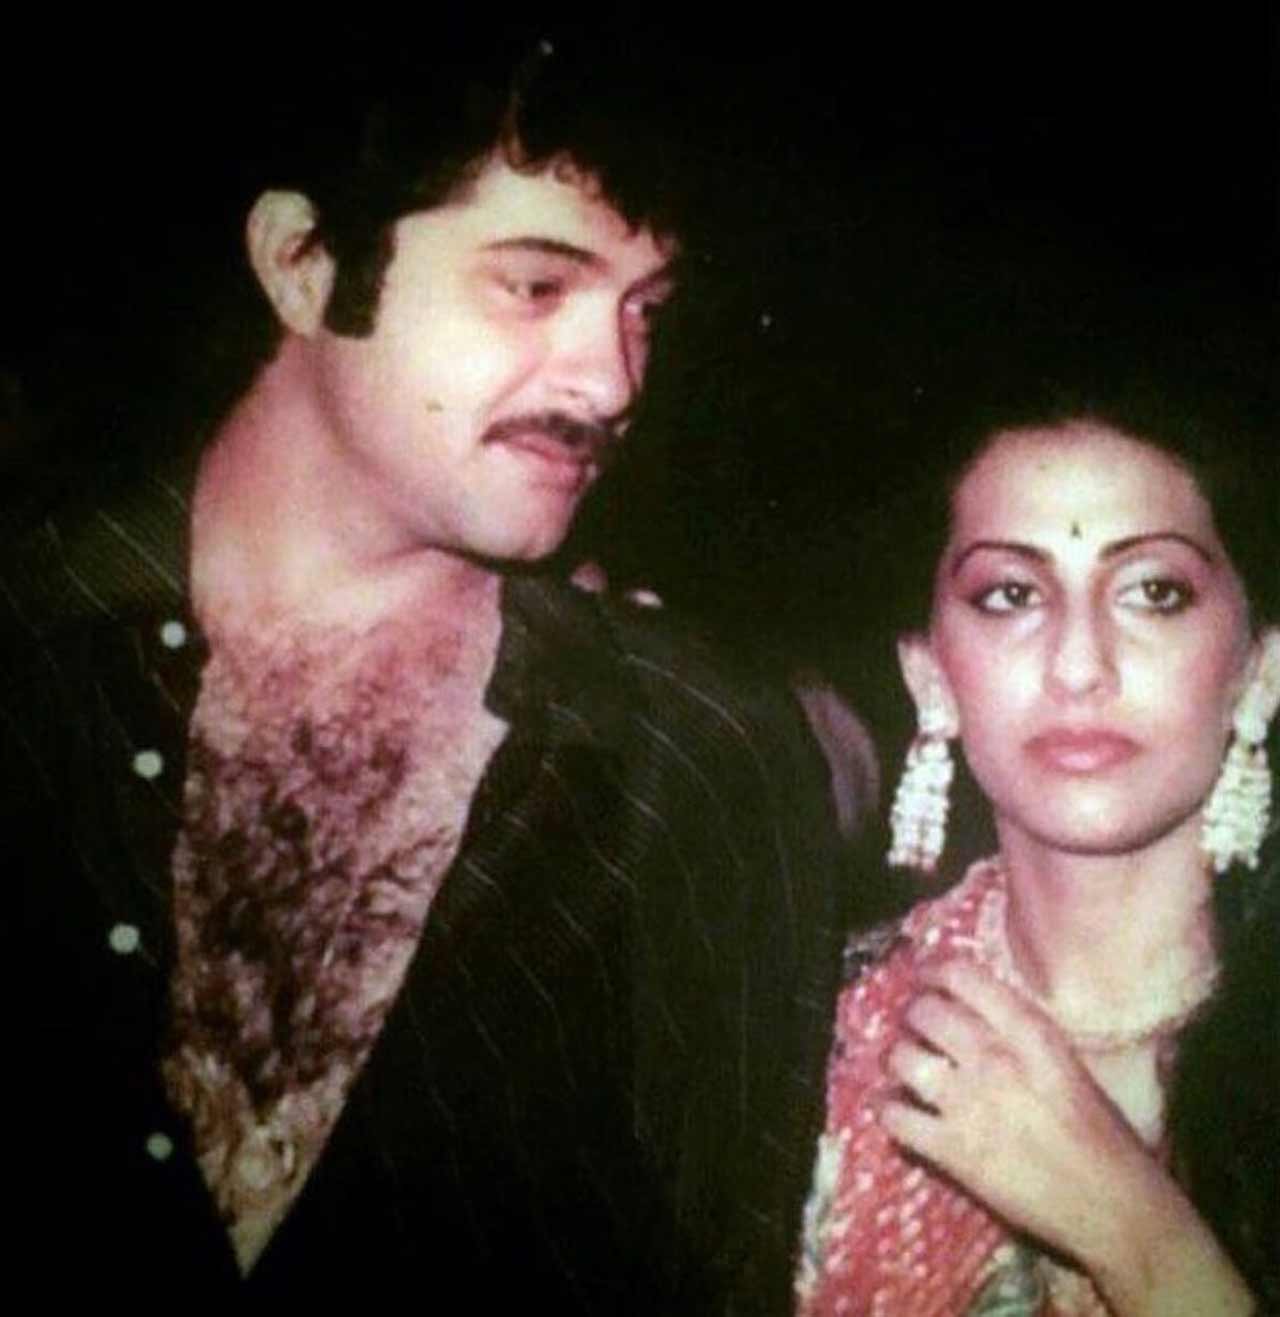 Sonam Kapoor shared a sweet post wishing her parents Sunita and Anil a happy anniversary. She wrote, 